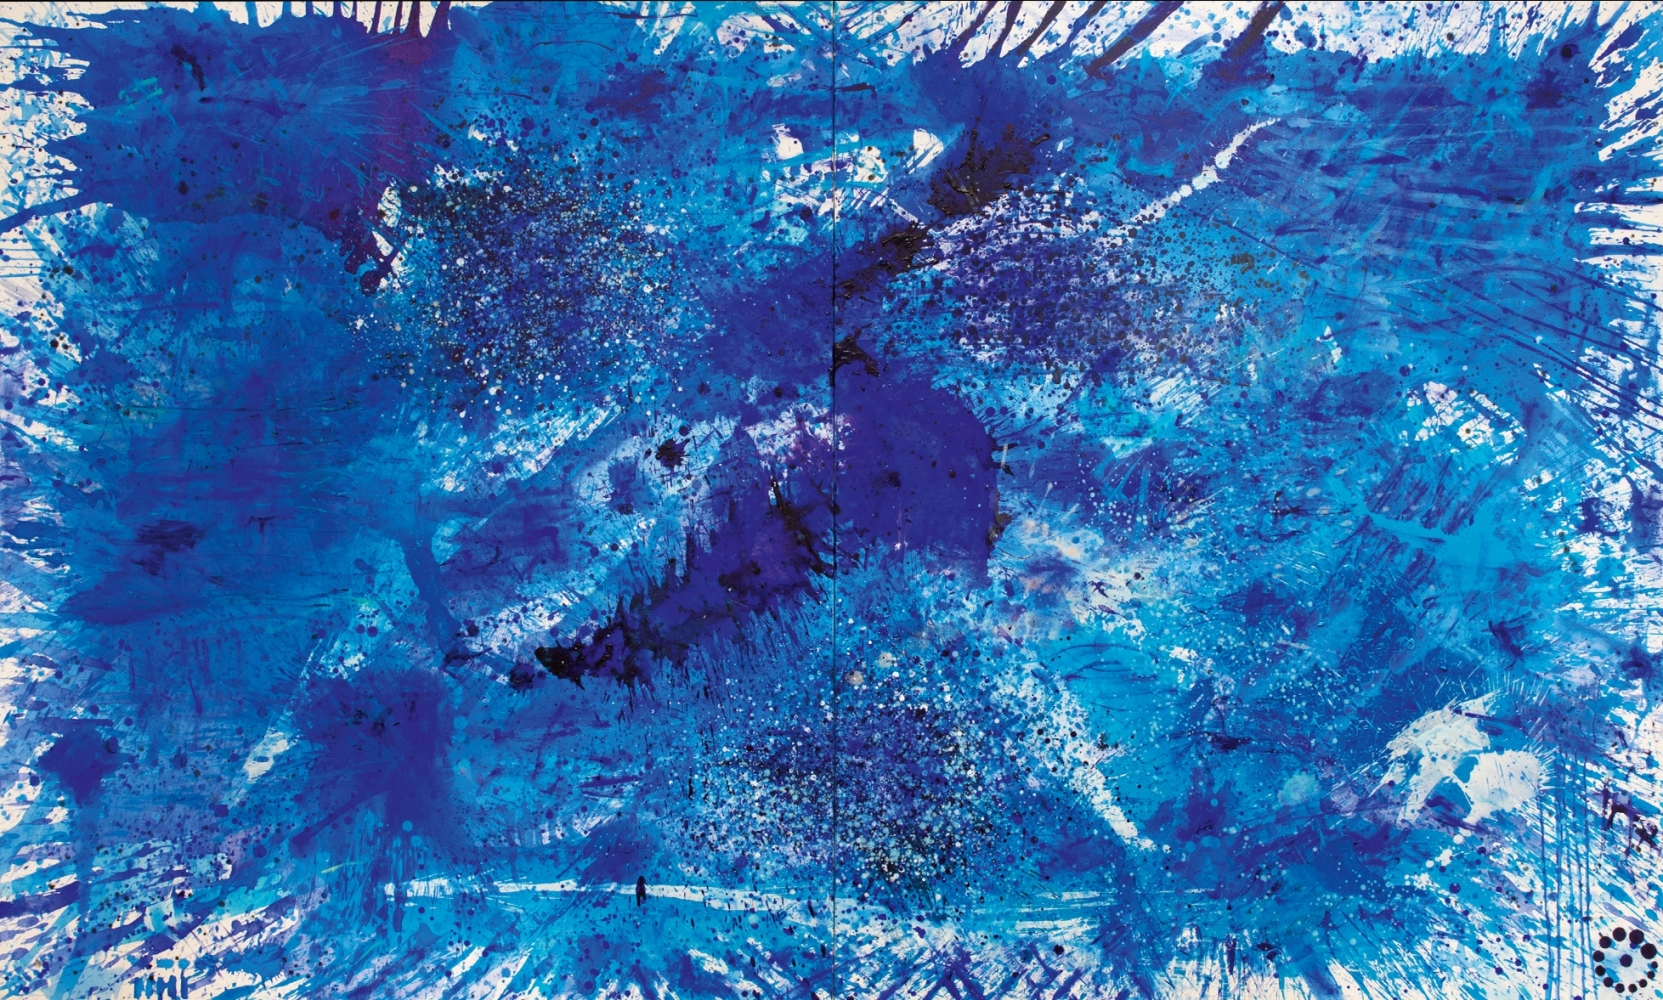 J. Steven Manolis, BlueLand Splash (Feminine), 2016, Acrylic painting on canvas, 72 x 120 inches, Extra large Wall Art, Blue Abstract Art for sale at Manolis Projects Art Gallery, Miami, Fl